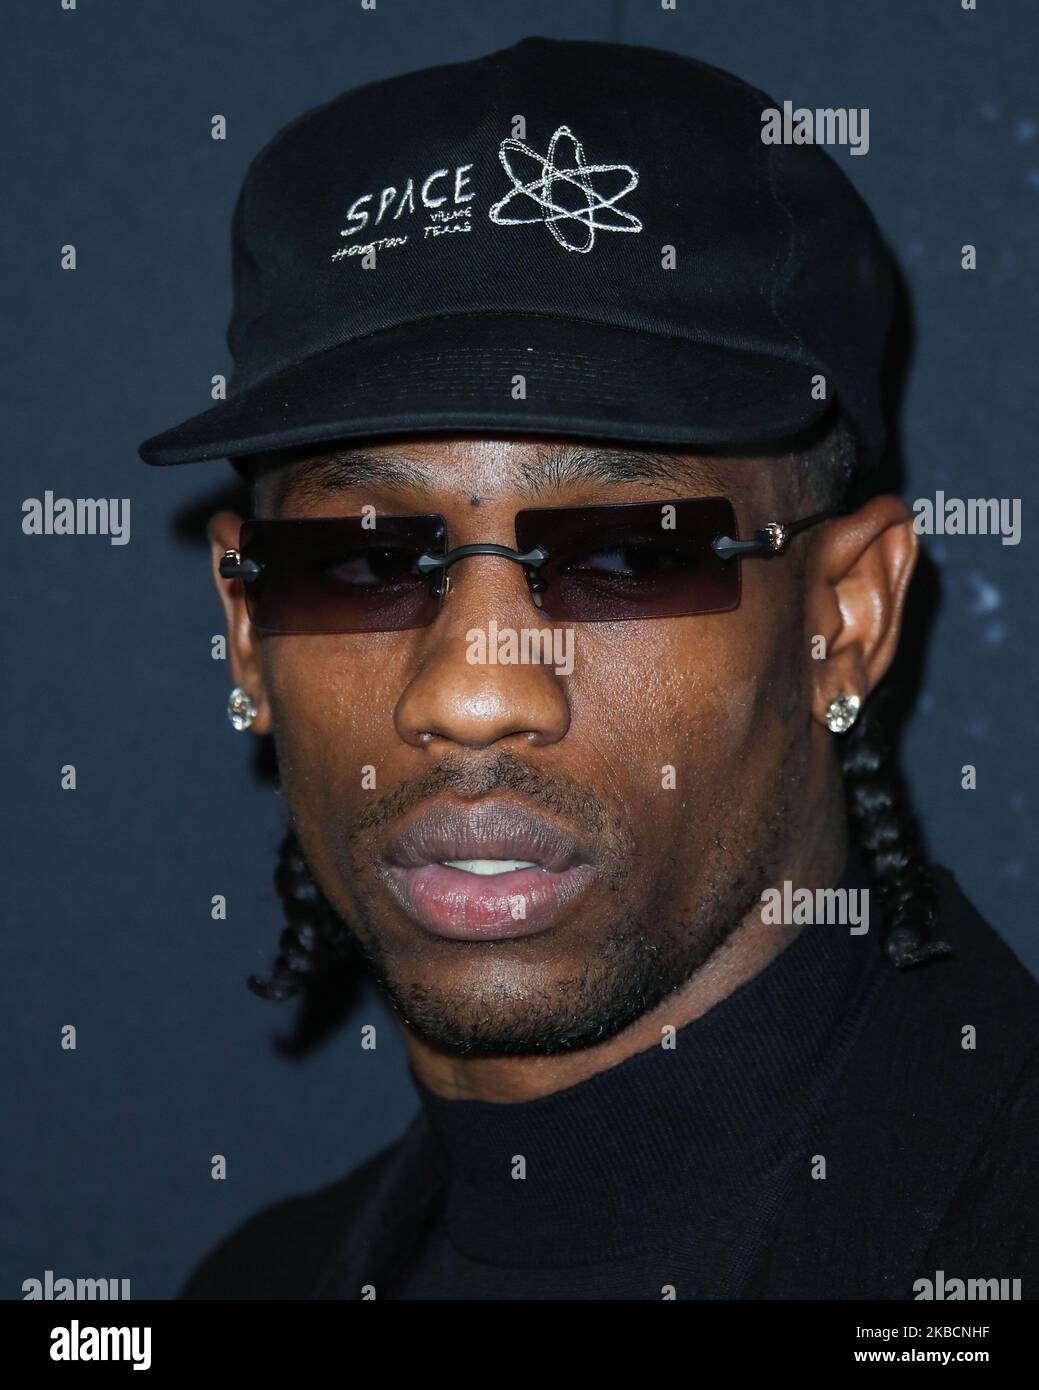 HOLLYWOOD, LOS ANGELES, CALIFORNIA, USA - DECEMBER 11: Rapper Travis Scott arrives at the Los Angeles Premiere Of A24's 'Uncut Gems' held at the ArcLight Cinerama Dome on December 11, 2019 in Hollywood, Los Angeles, California, United States. (Photo by Xavier Collin/Image Press Agency/NurPhoto) Stock Photo